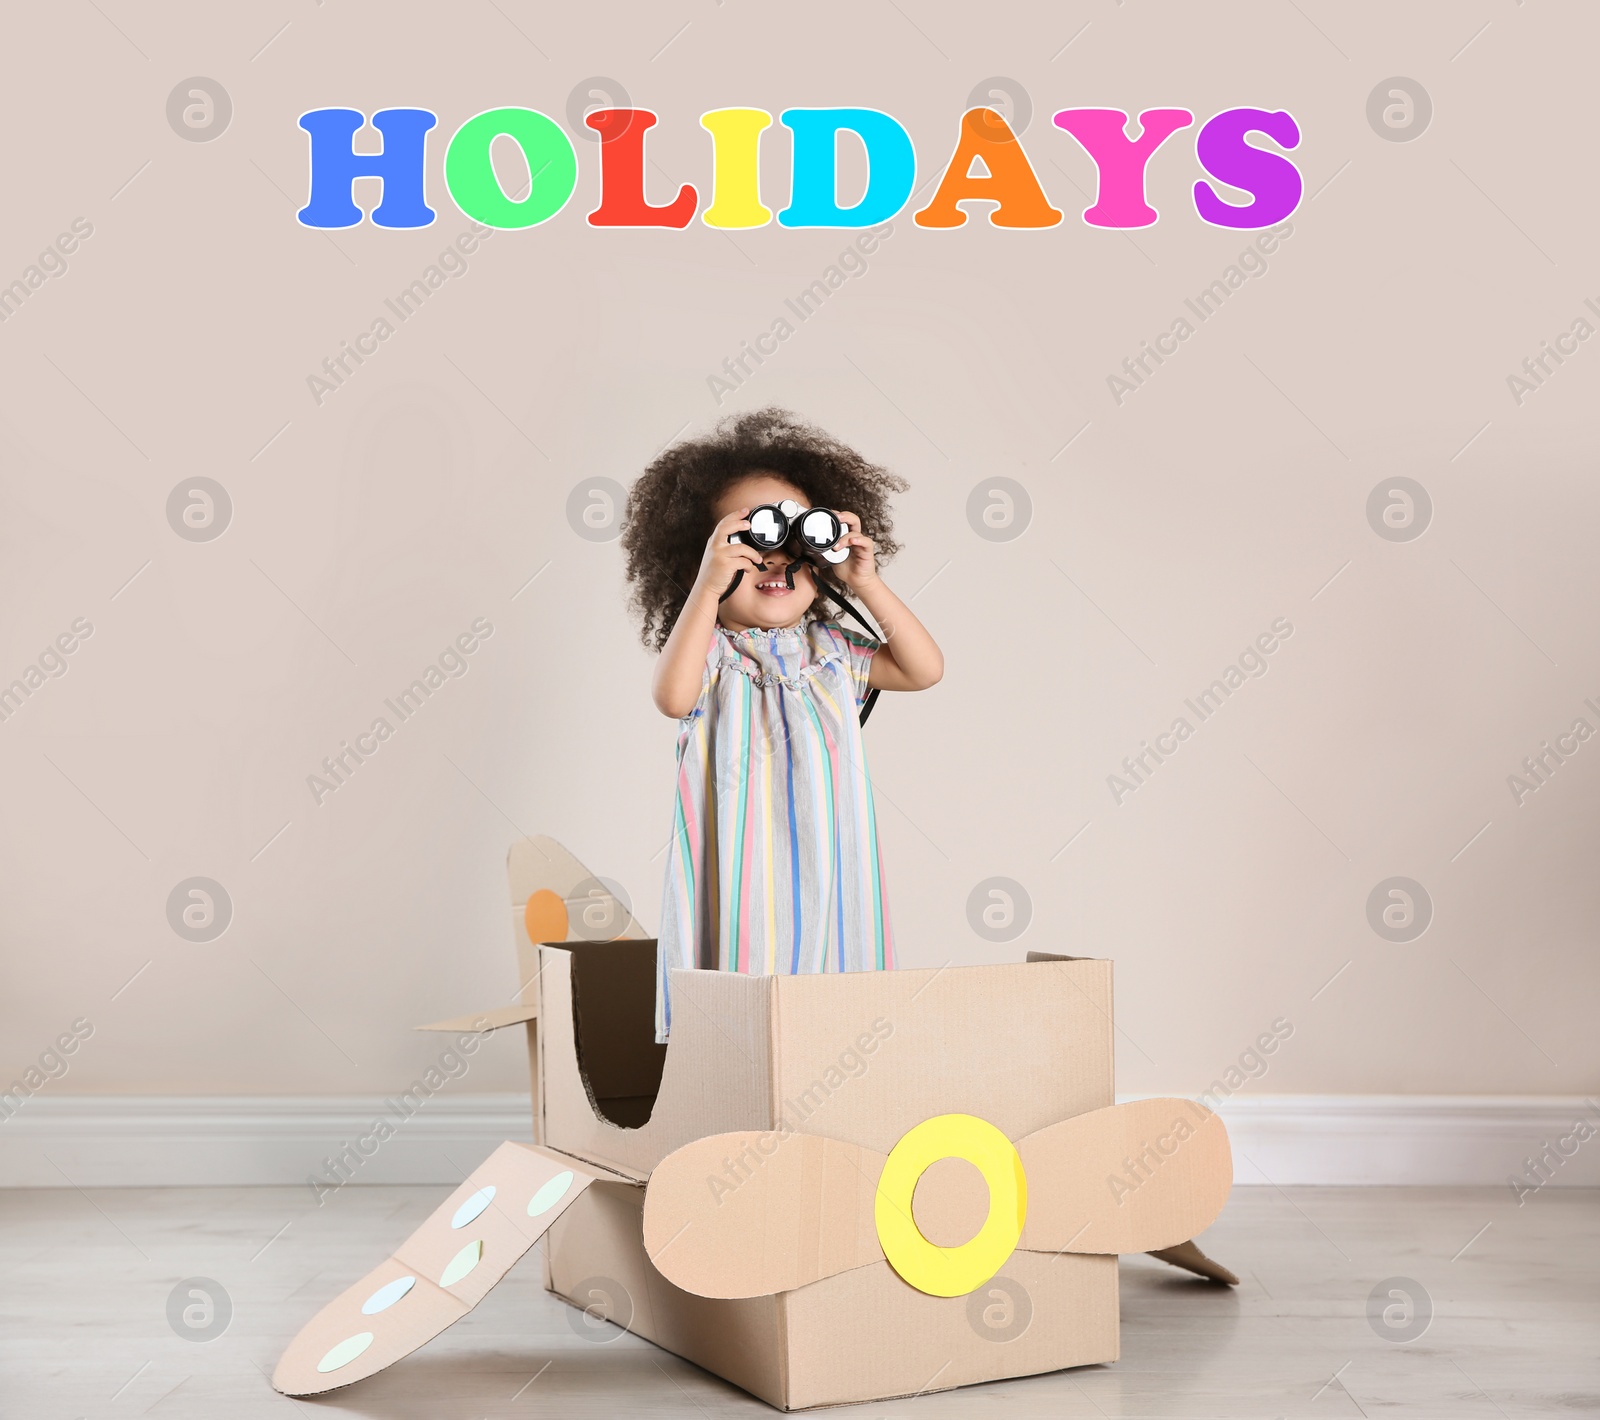 Image of School holidays. Cute little child playing with cardboard plane near beige wall